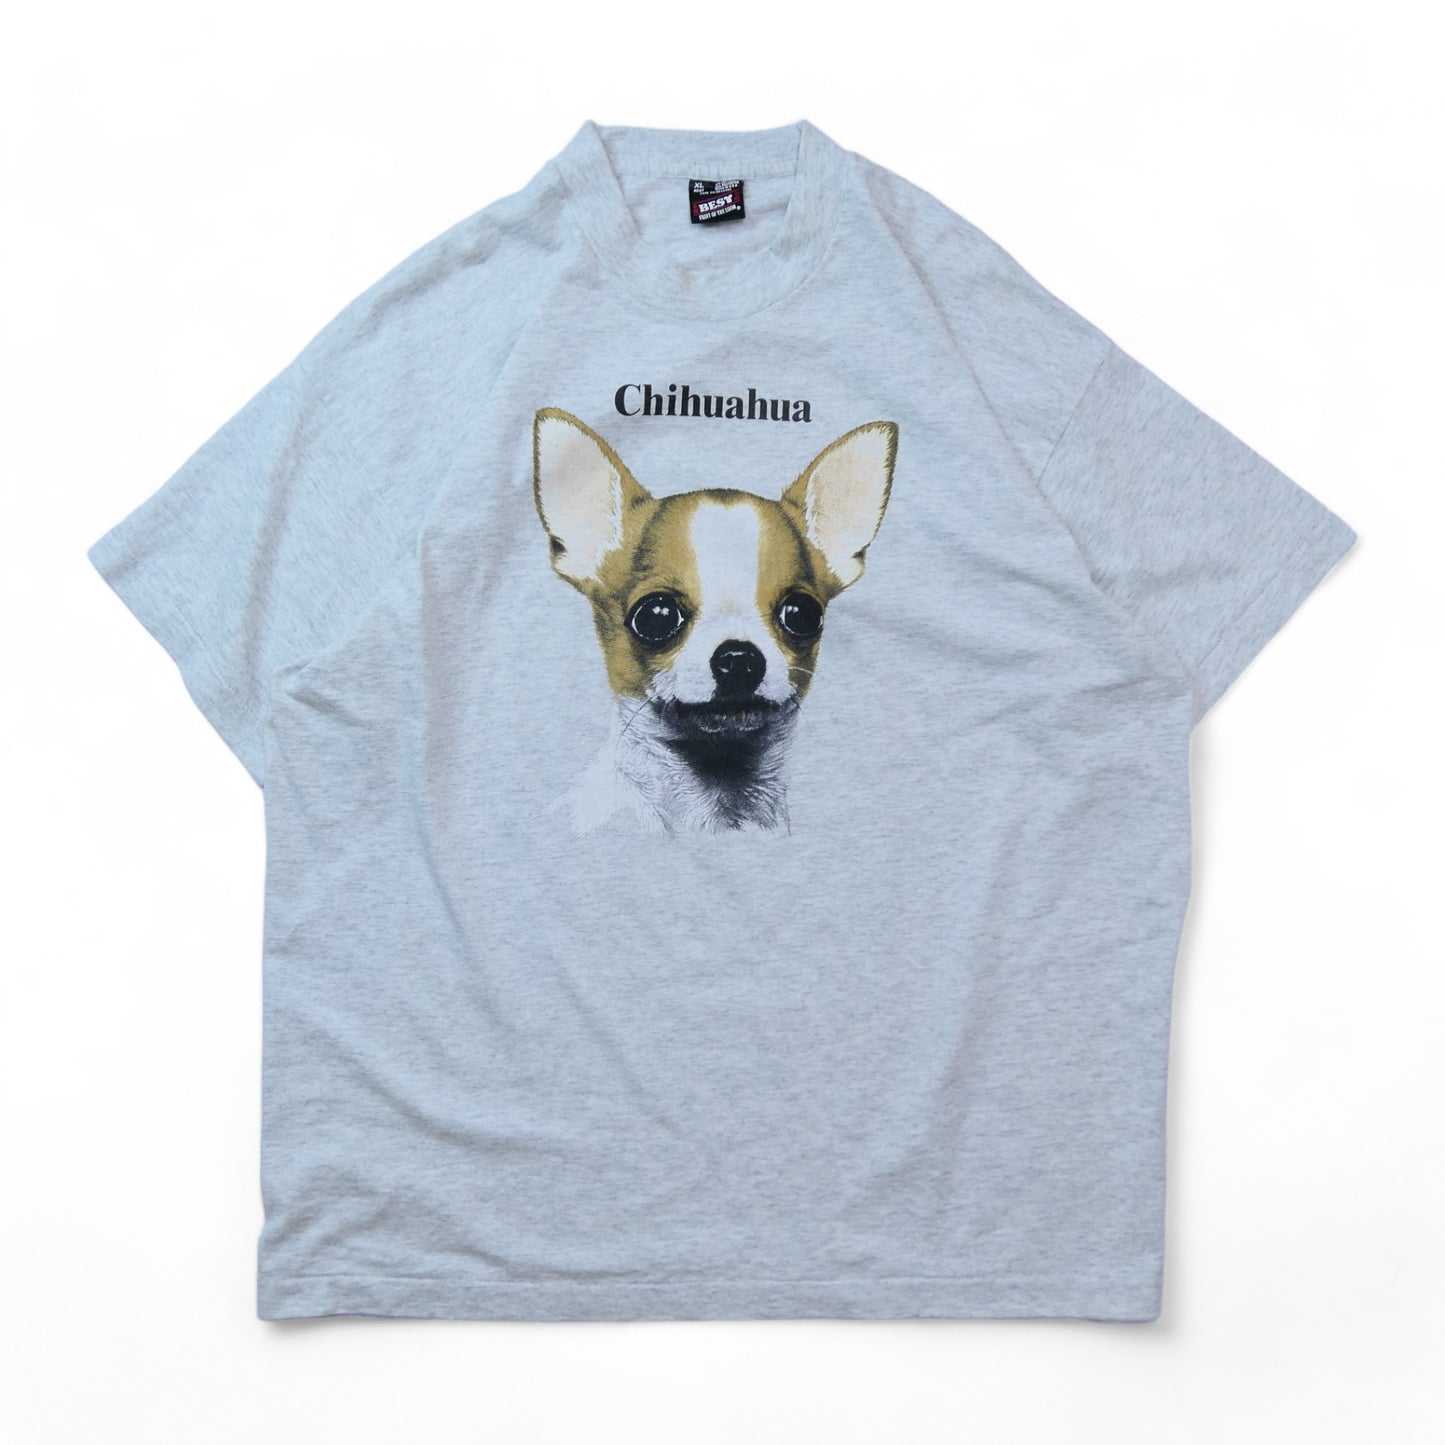 VINTAGE 90s XL Dog Face Tee "Chihuahua" -TELETREND COLS-